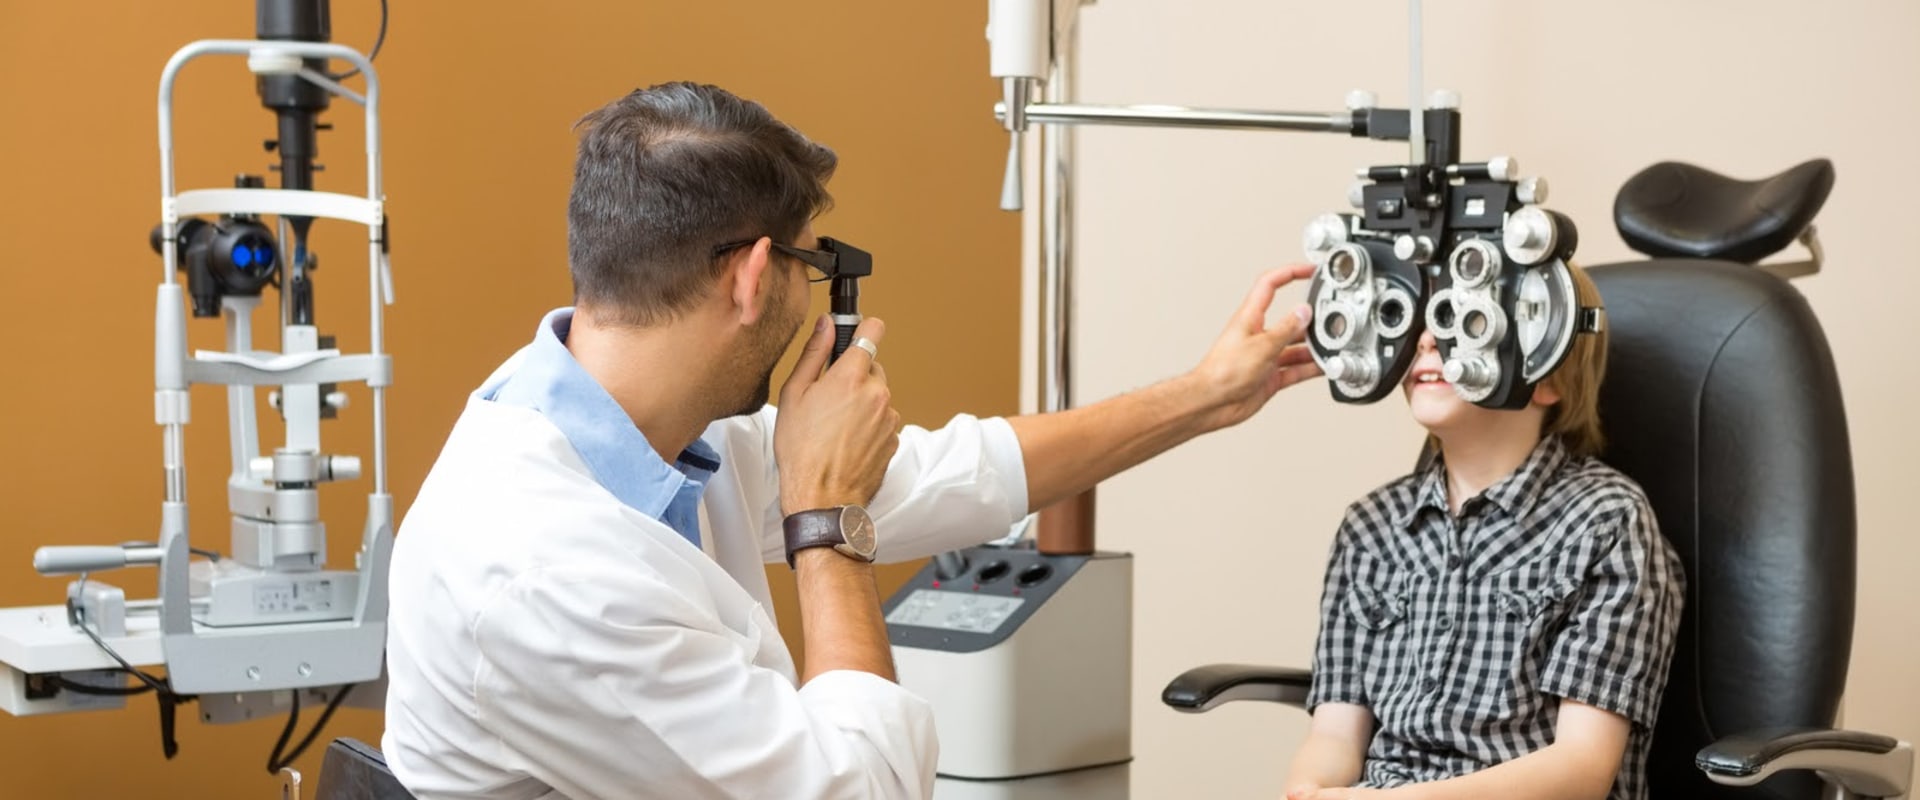 When is the Best Time for an Eye Exam?